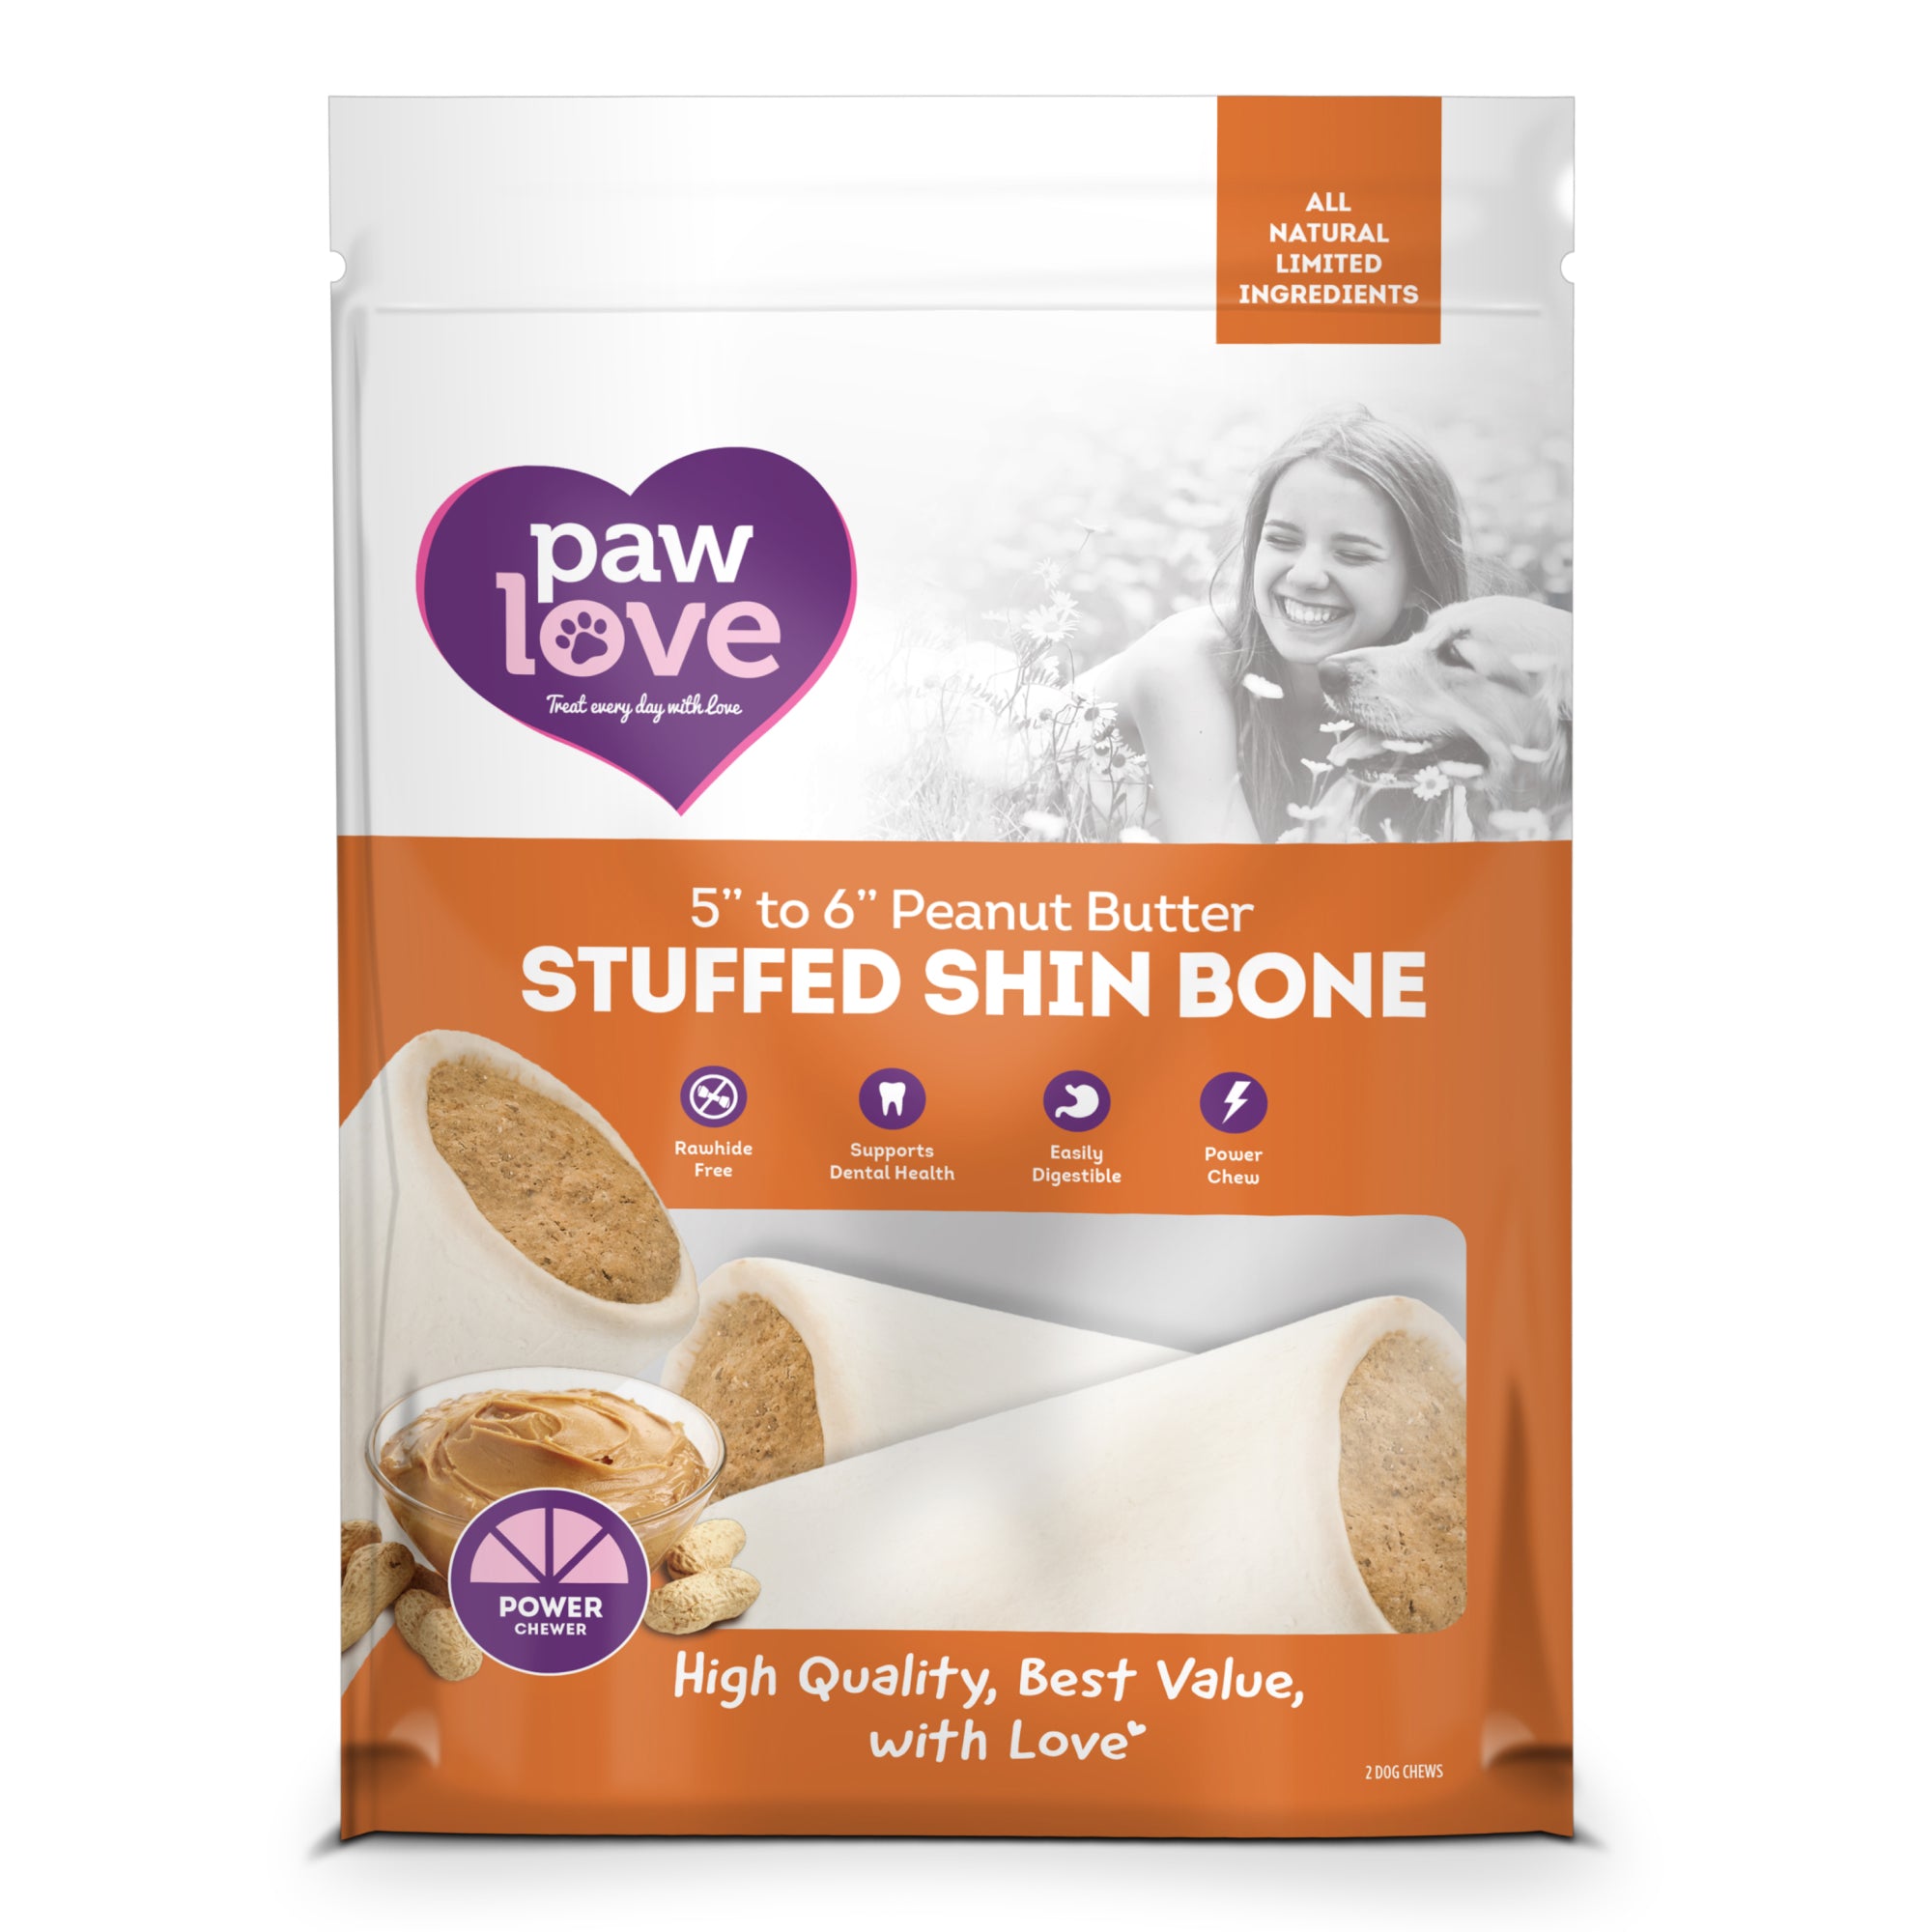 Package of Paw Love brand PW 5-6" Peanut Butter Stuffed Shin bones for dogs with an image of a happy pet owner and dog playing in the background.